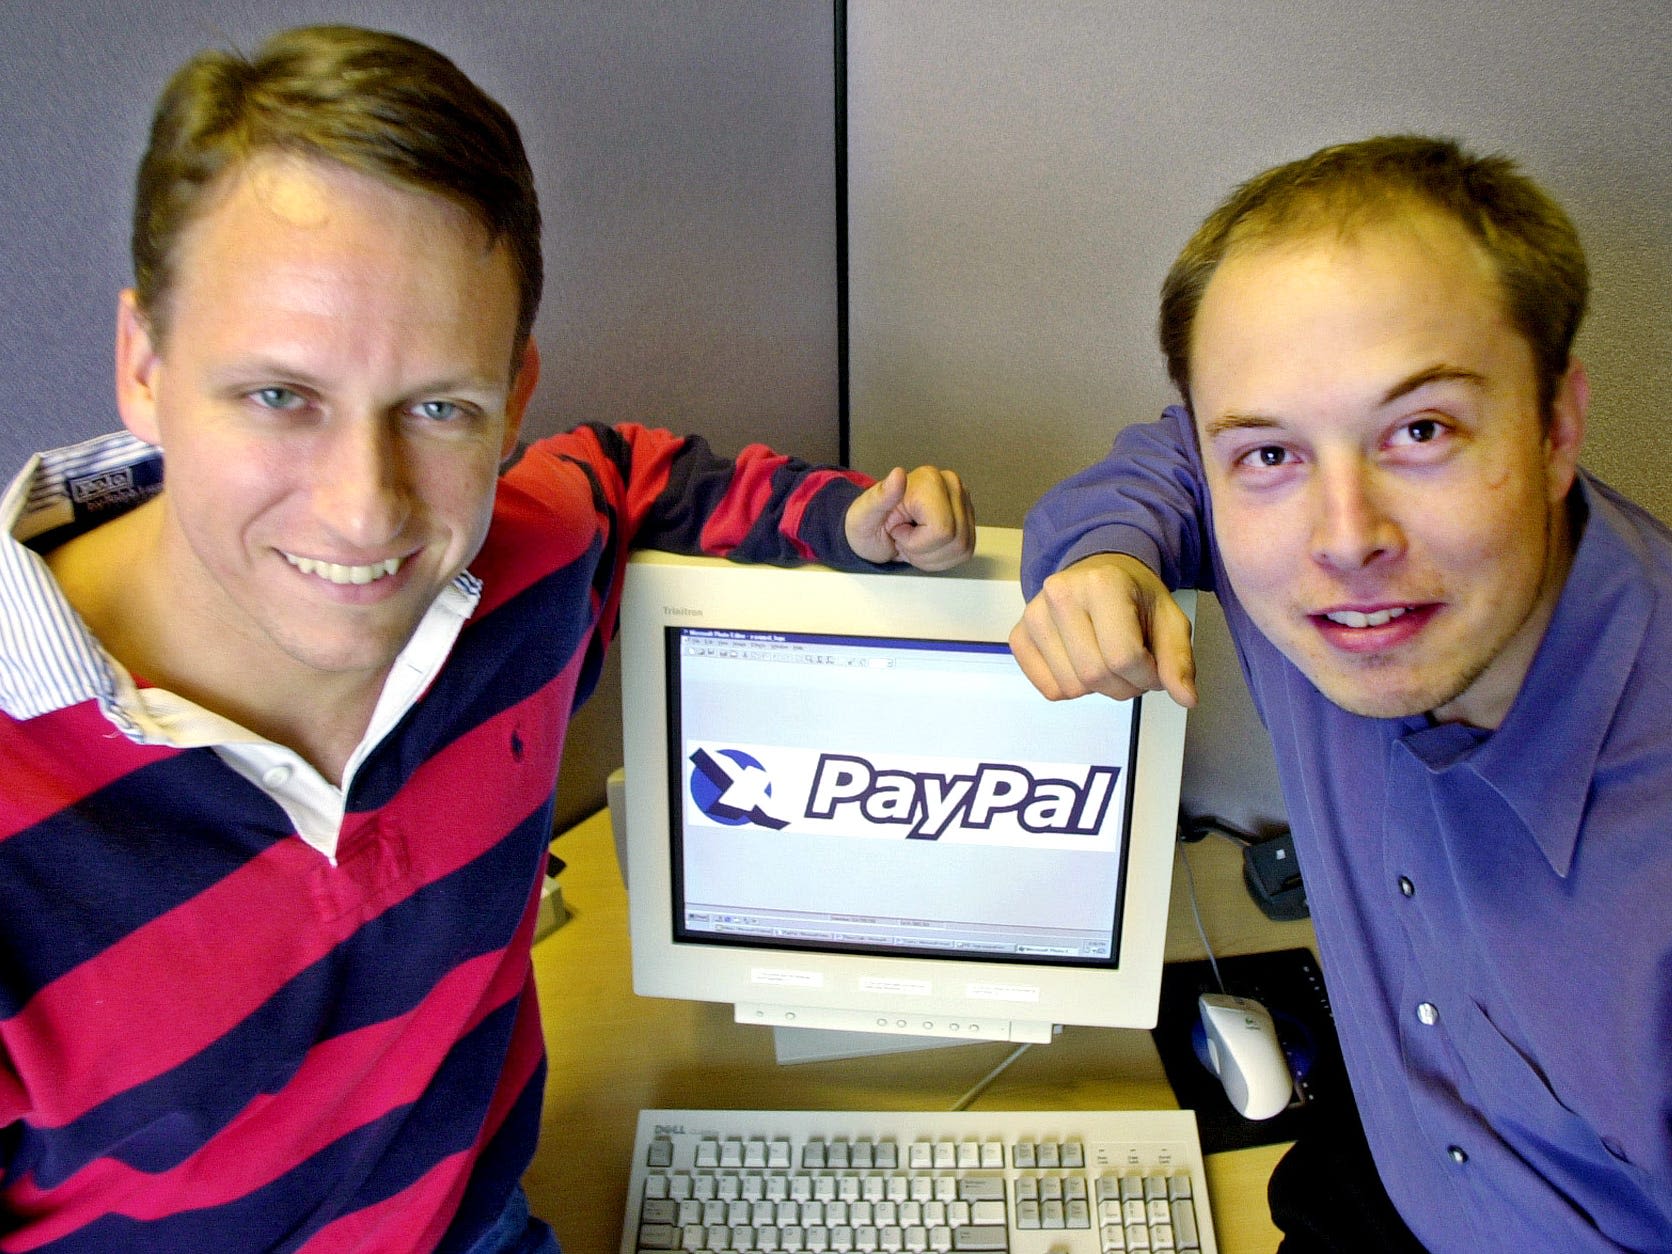 Members of the PayPal Mafia include tech titans like Elon Musk, Peter Thiel, and Reid Hoffman. Here's where they are now.